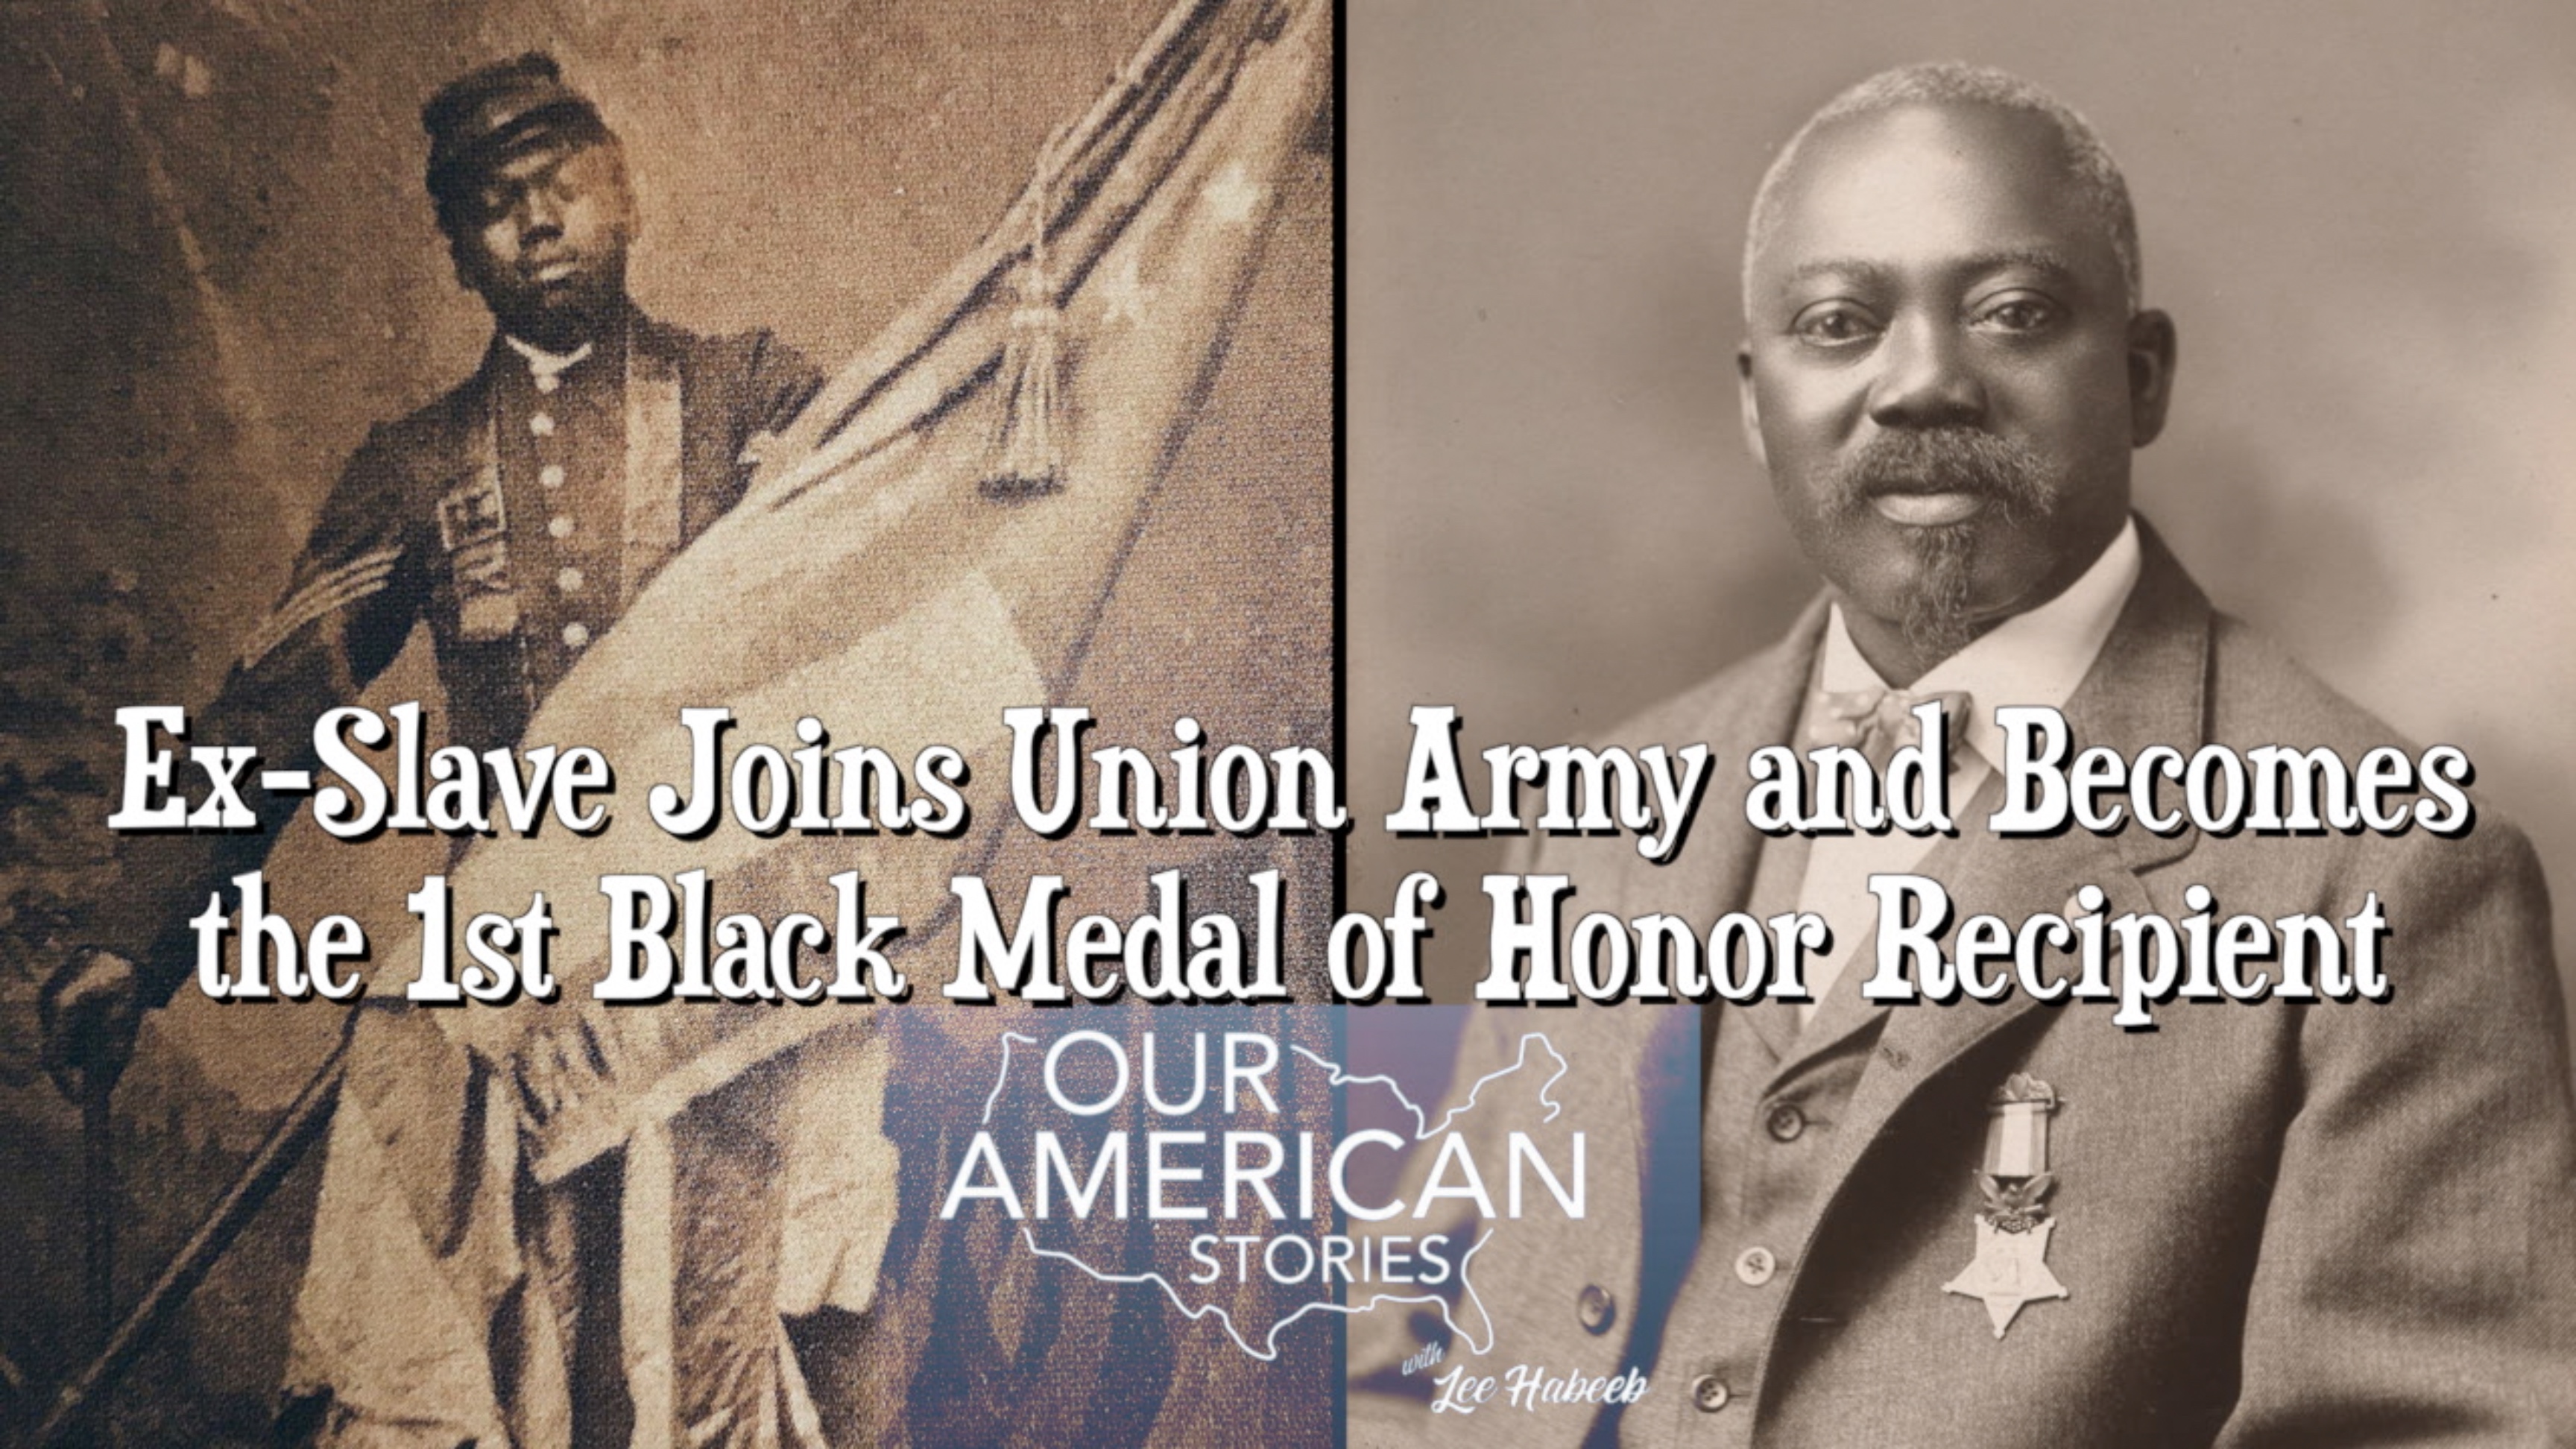 The Ex-Slave Who Joined the Union Army and Became the 1st Black Medal of Honor Recipient